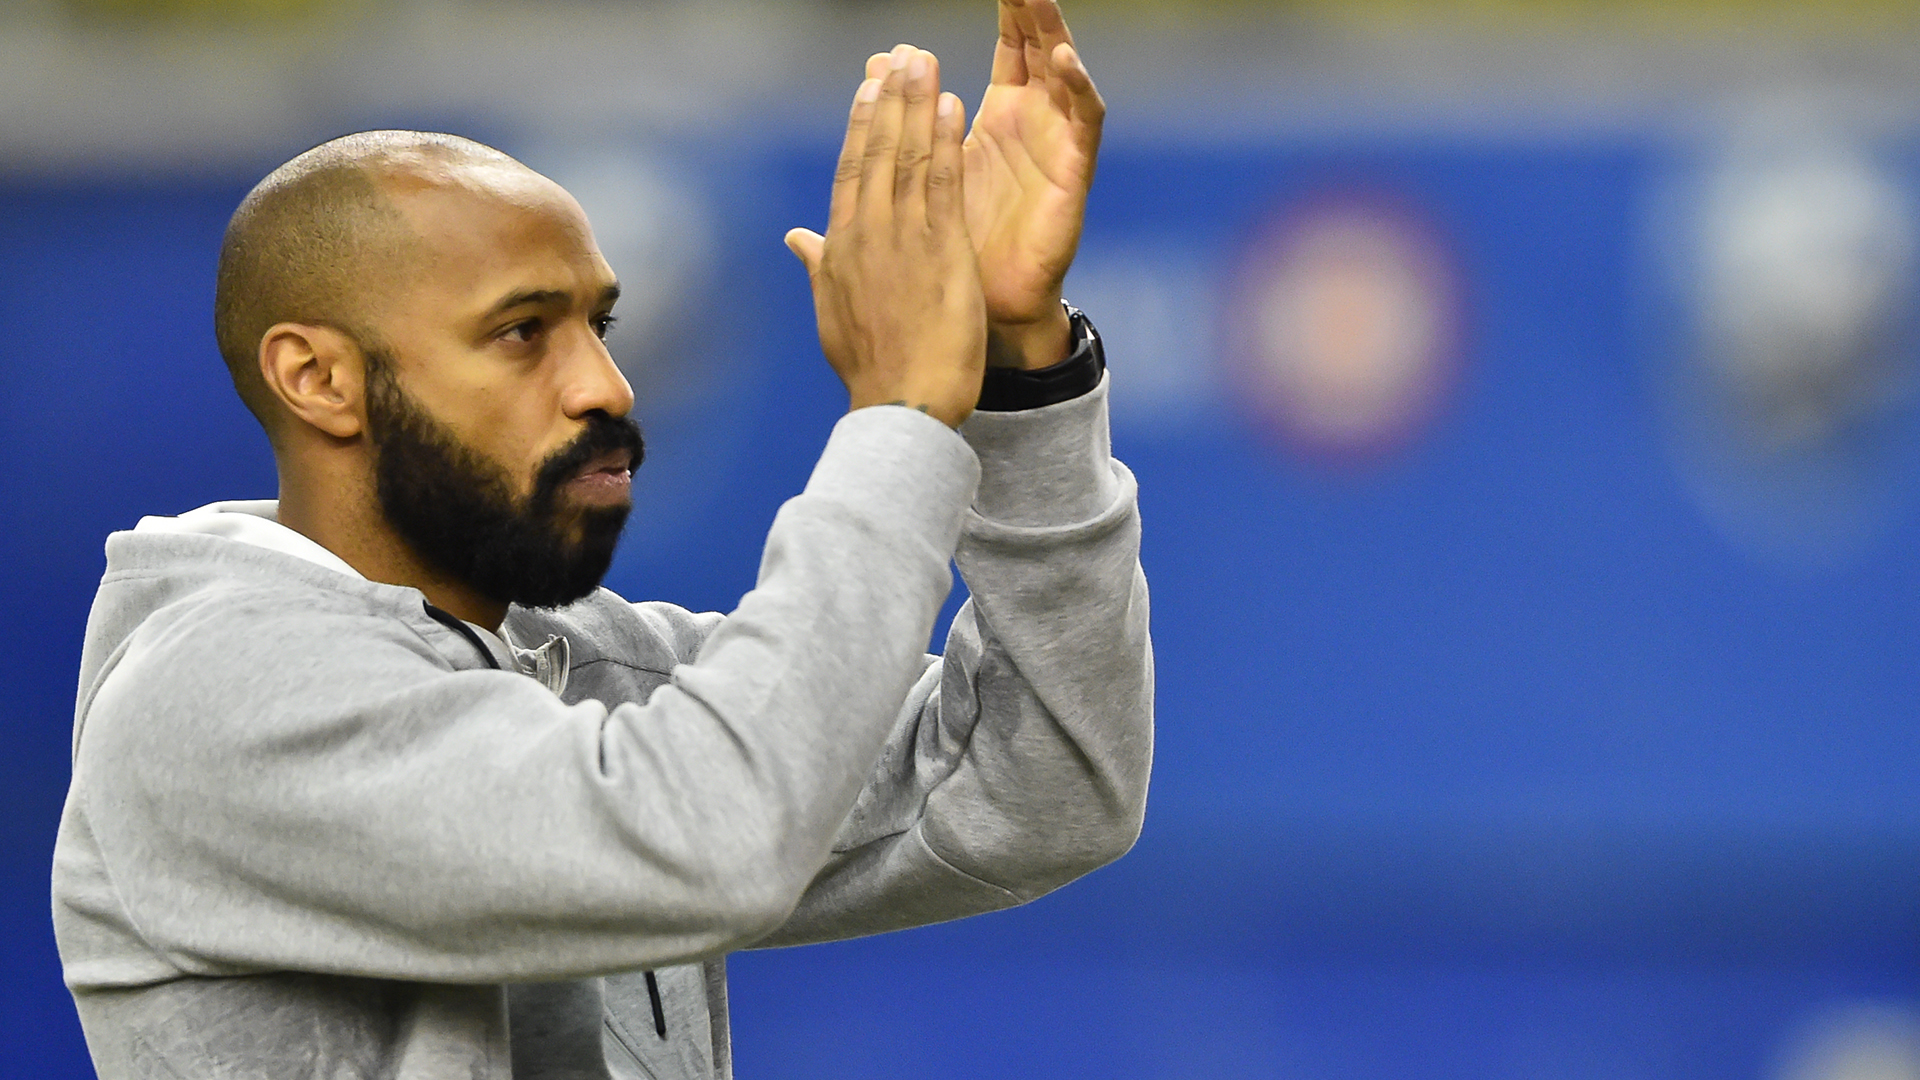 Thierry Henry steps down as Montréal coach due to separation from